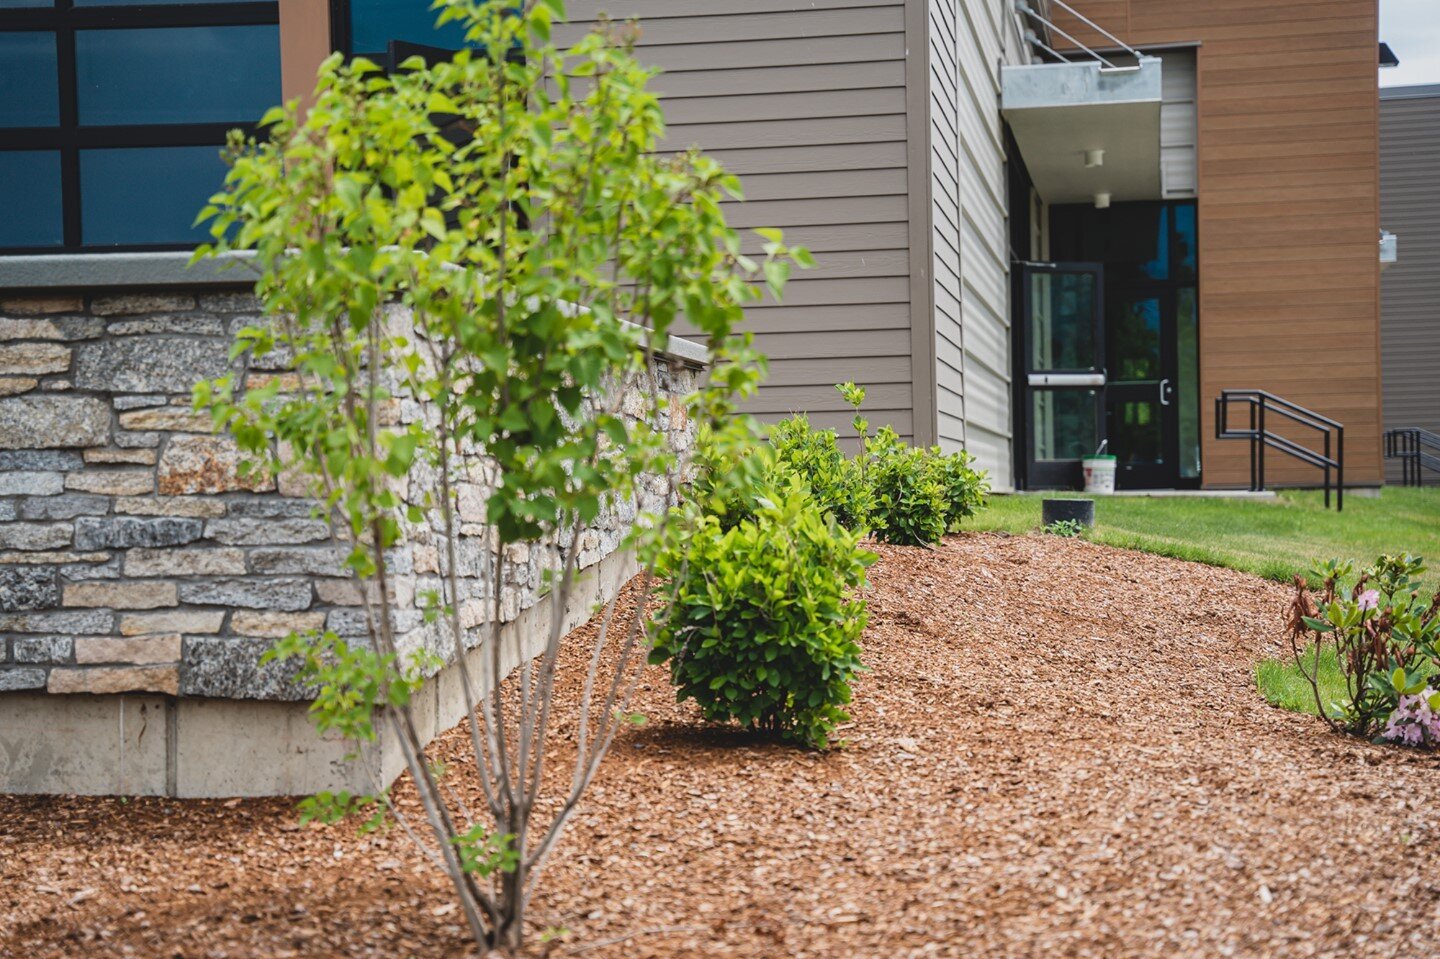 Admiring how the red mulch and shrubbery accentuates the beauty of the multi-colored brick and modern design at Williston's new Healthy Living. ⠀
⠀
An important example of how landscaping design is just as integral to your overall property look as bu